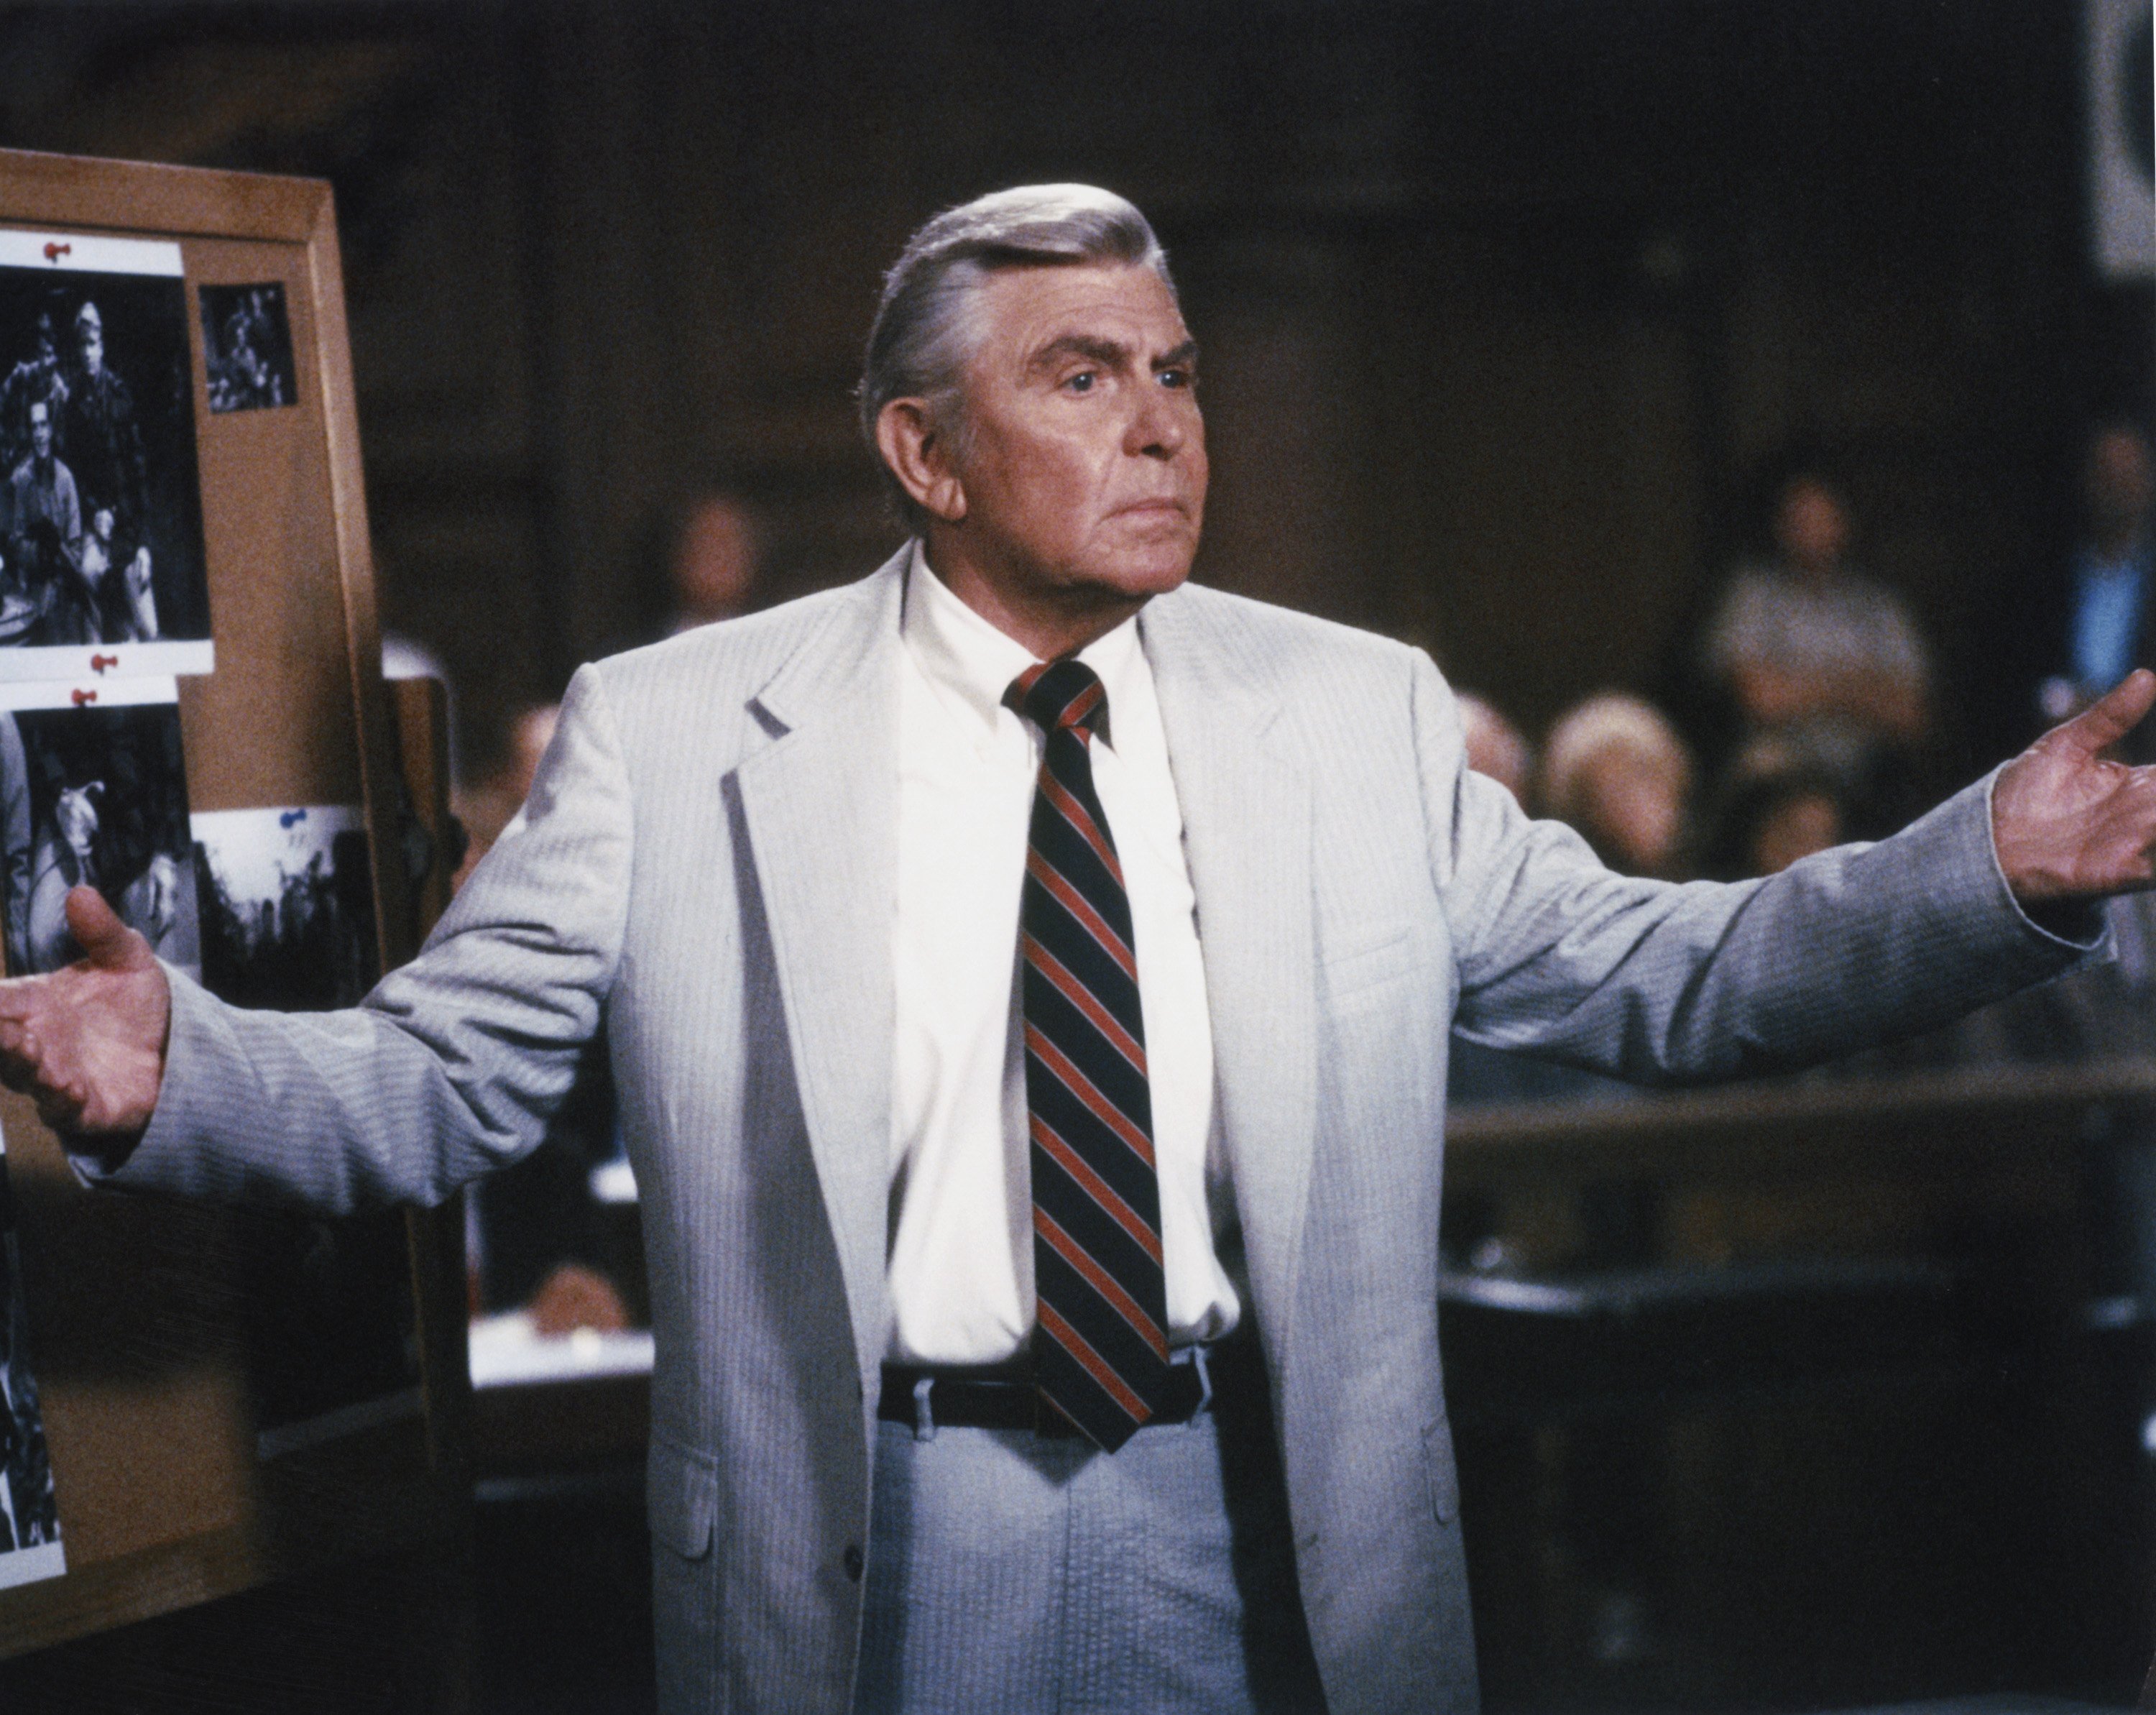 Andy Griffith addresses a courtroom in the role of Atlanta attorney Ben Matlock in a scene from 'Matlock'